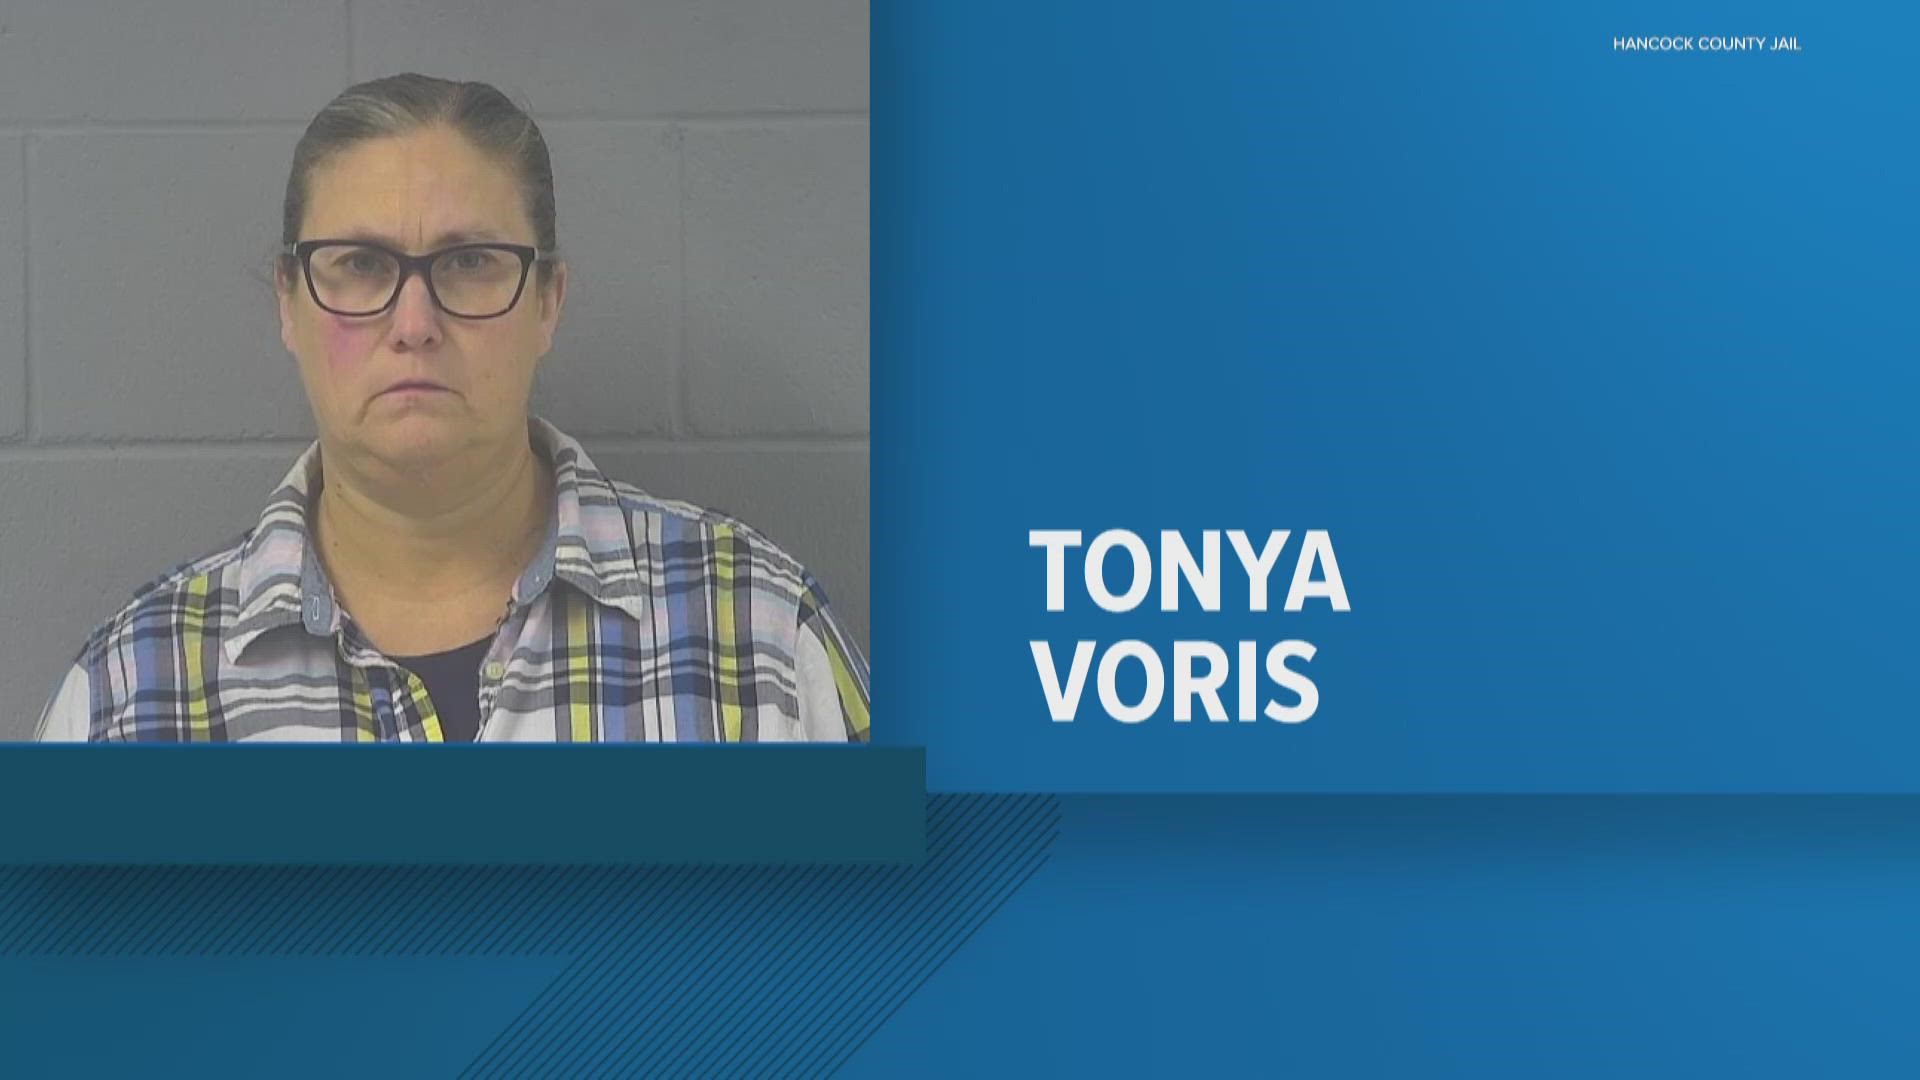 Tonya Voris is accused of giving at least 17 children melatonin gummy supplements to get them asleep at nap time. Parents say they never approved that.